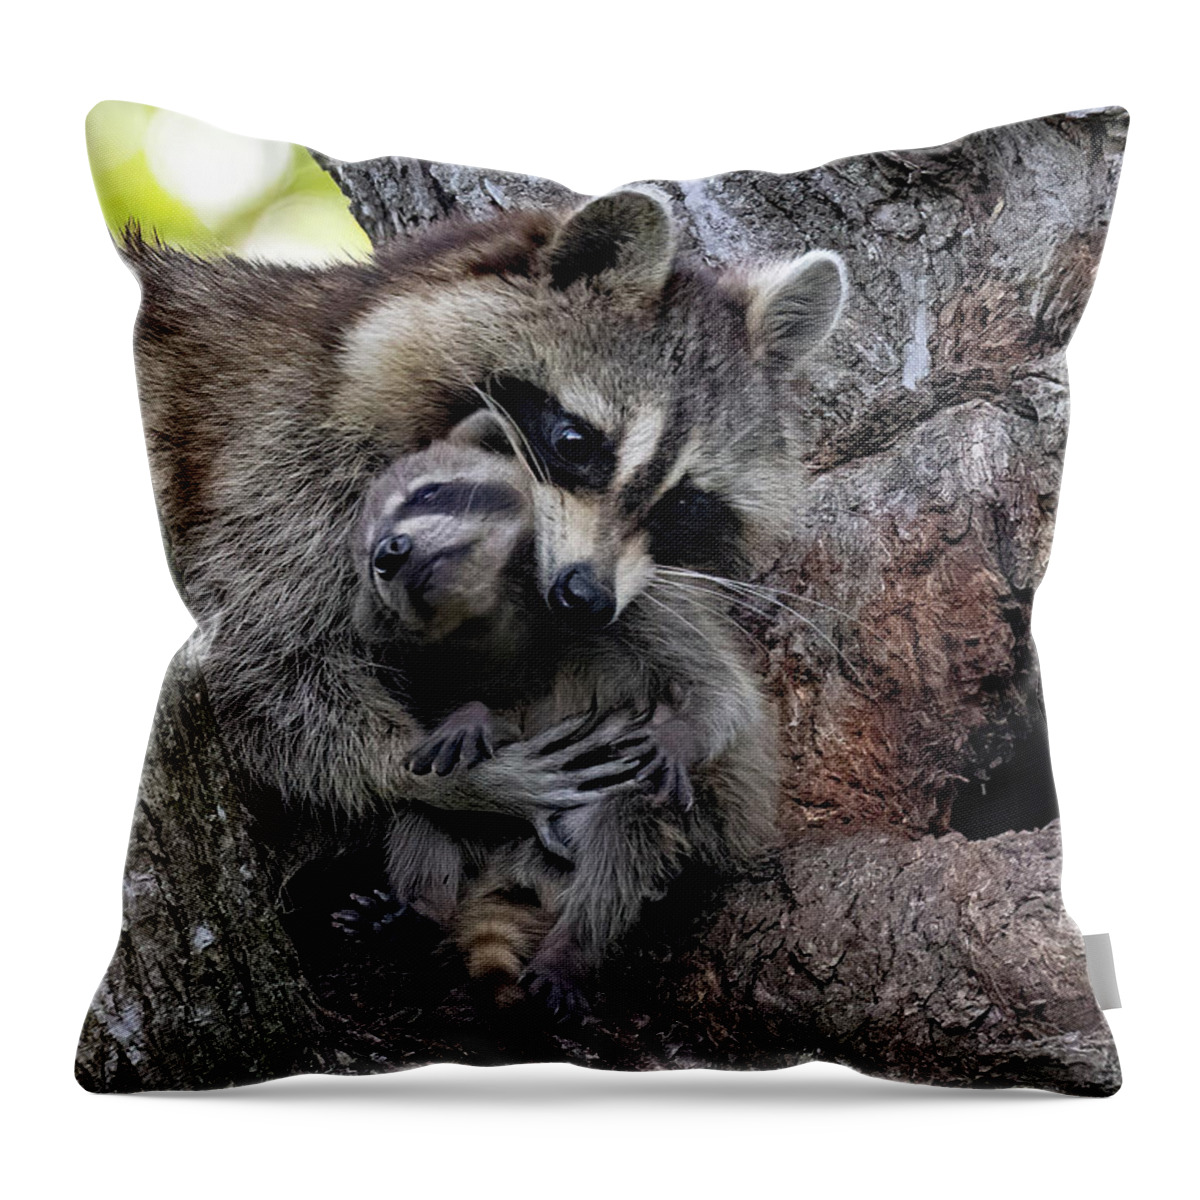 Animal Throw Pillow featuring the photograph Mom Keeps Me Safe by Gina Fitzhugh